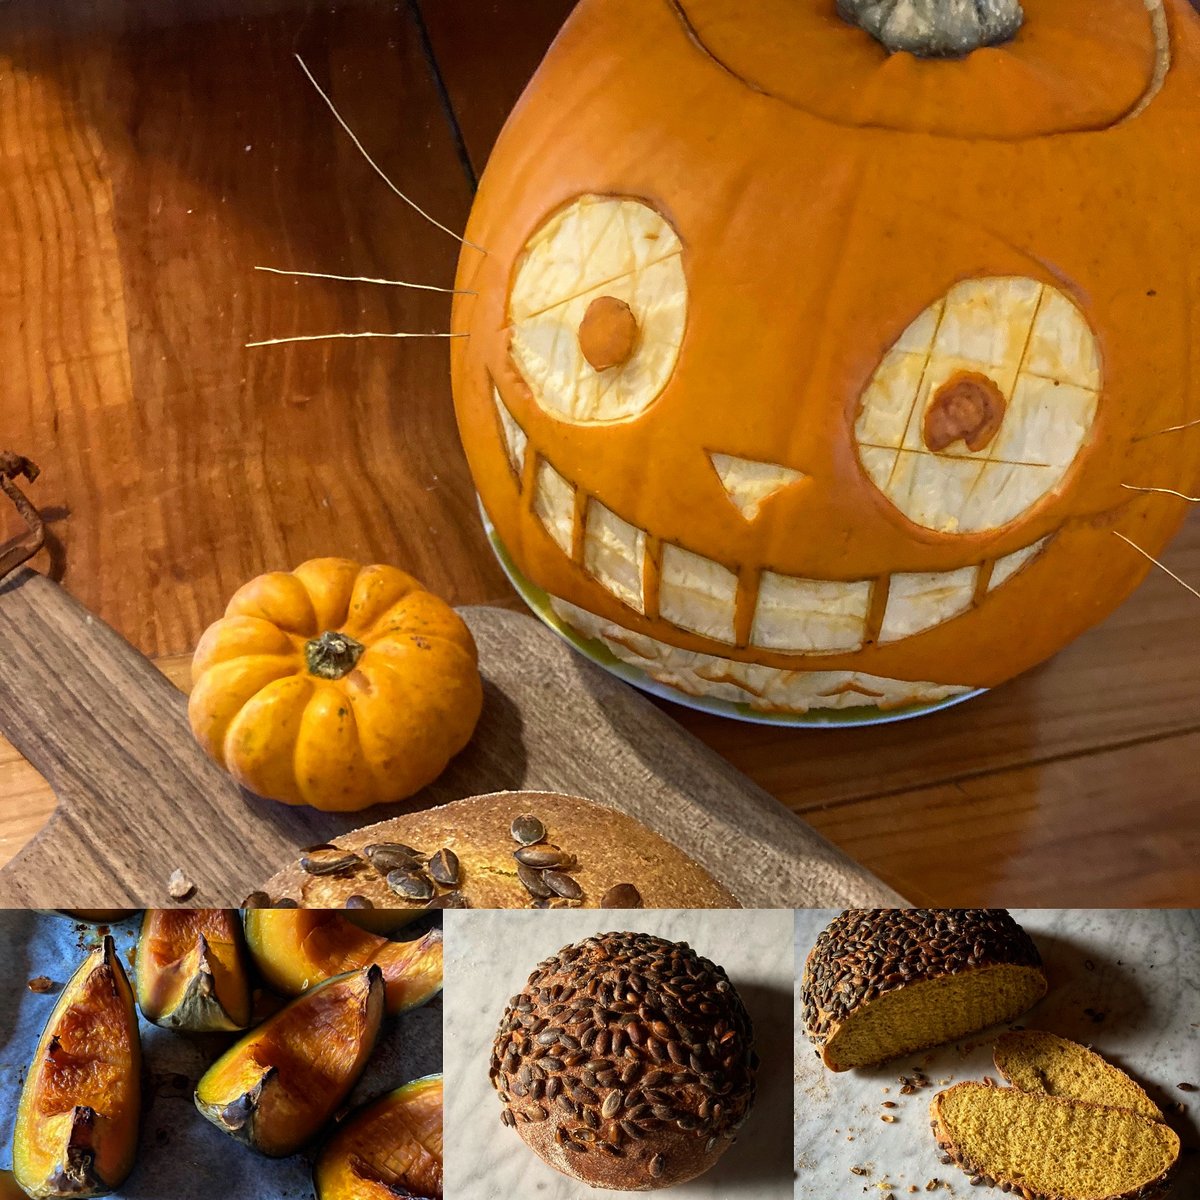 even if you don't carve them to look like Totoro there's something so cheerful about a pumpkin: and let's face it we all need a bit more cheer these days. This little beauty is from @vgreengrocers who supply crown prince pumpkins that make the pumpkin bread glow #localfoodheroes